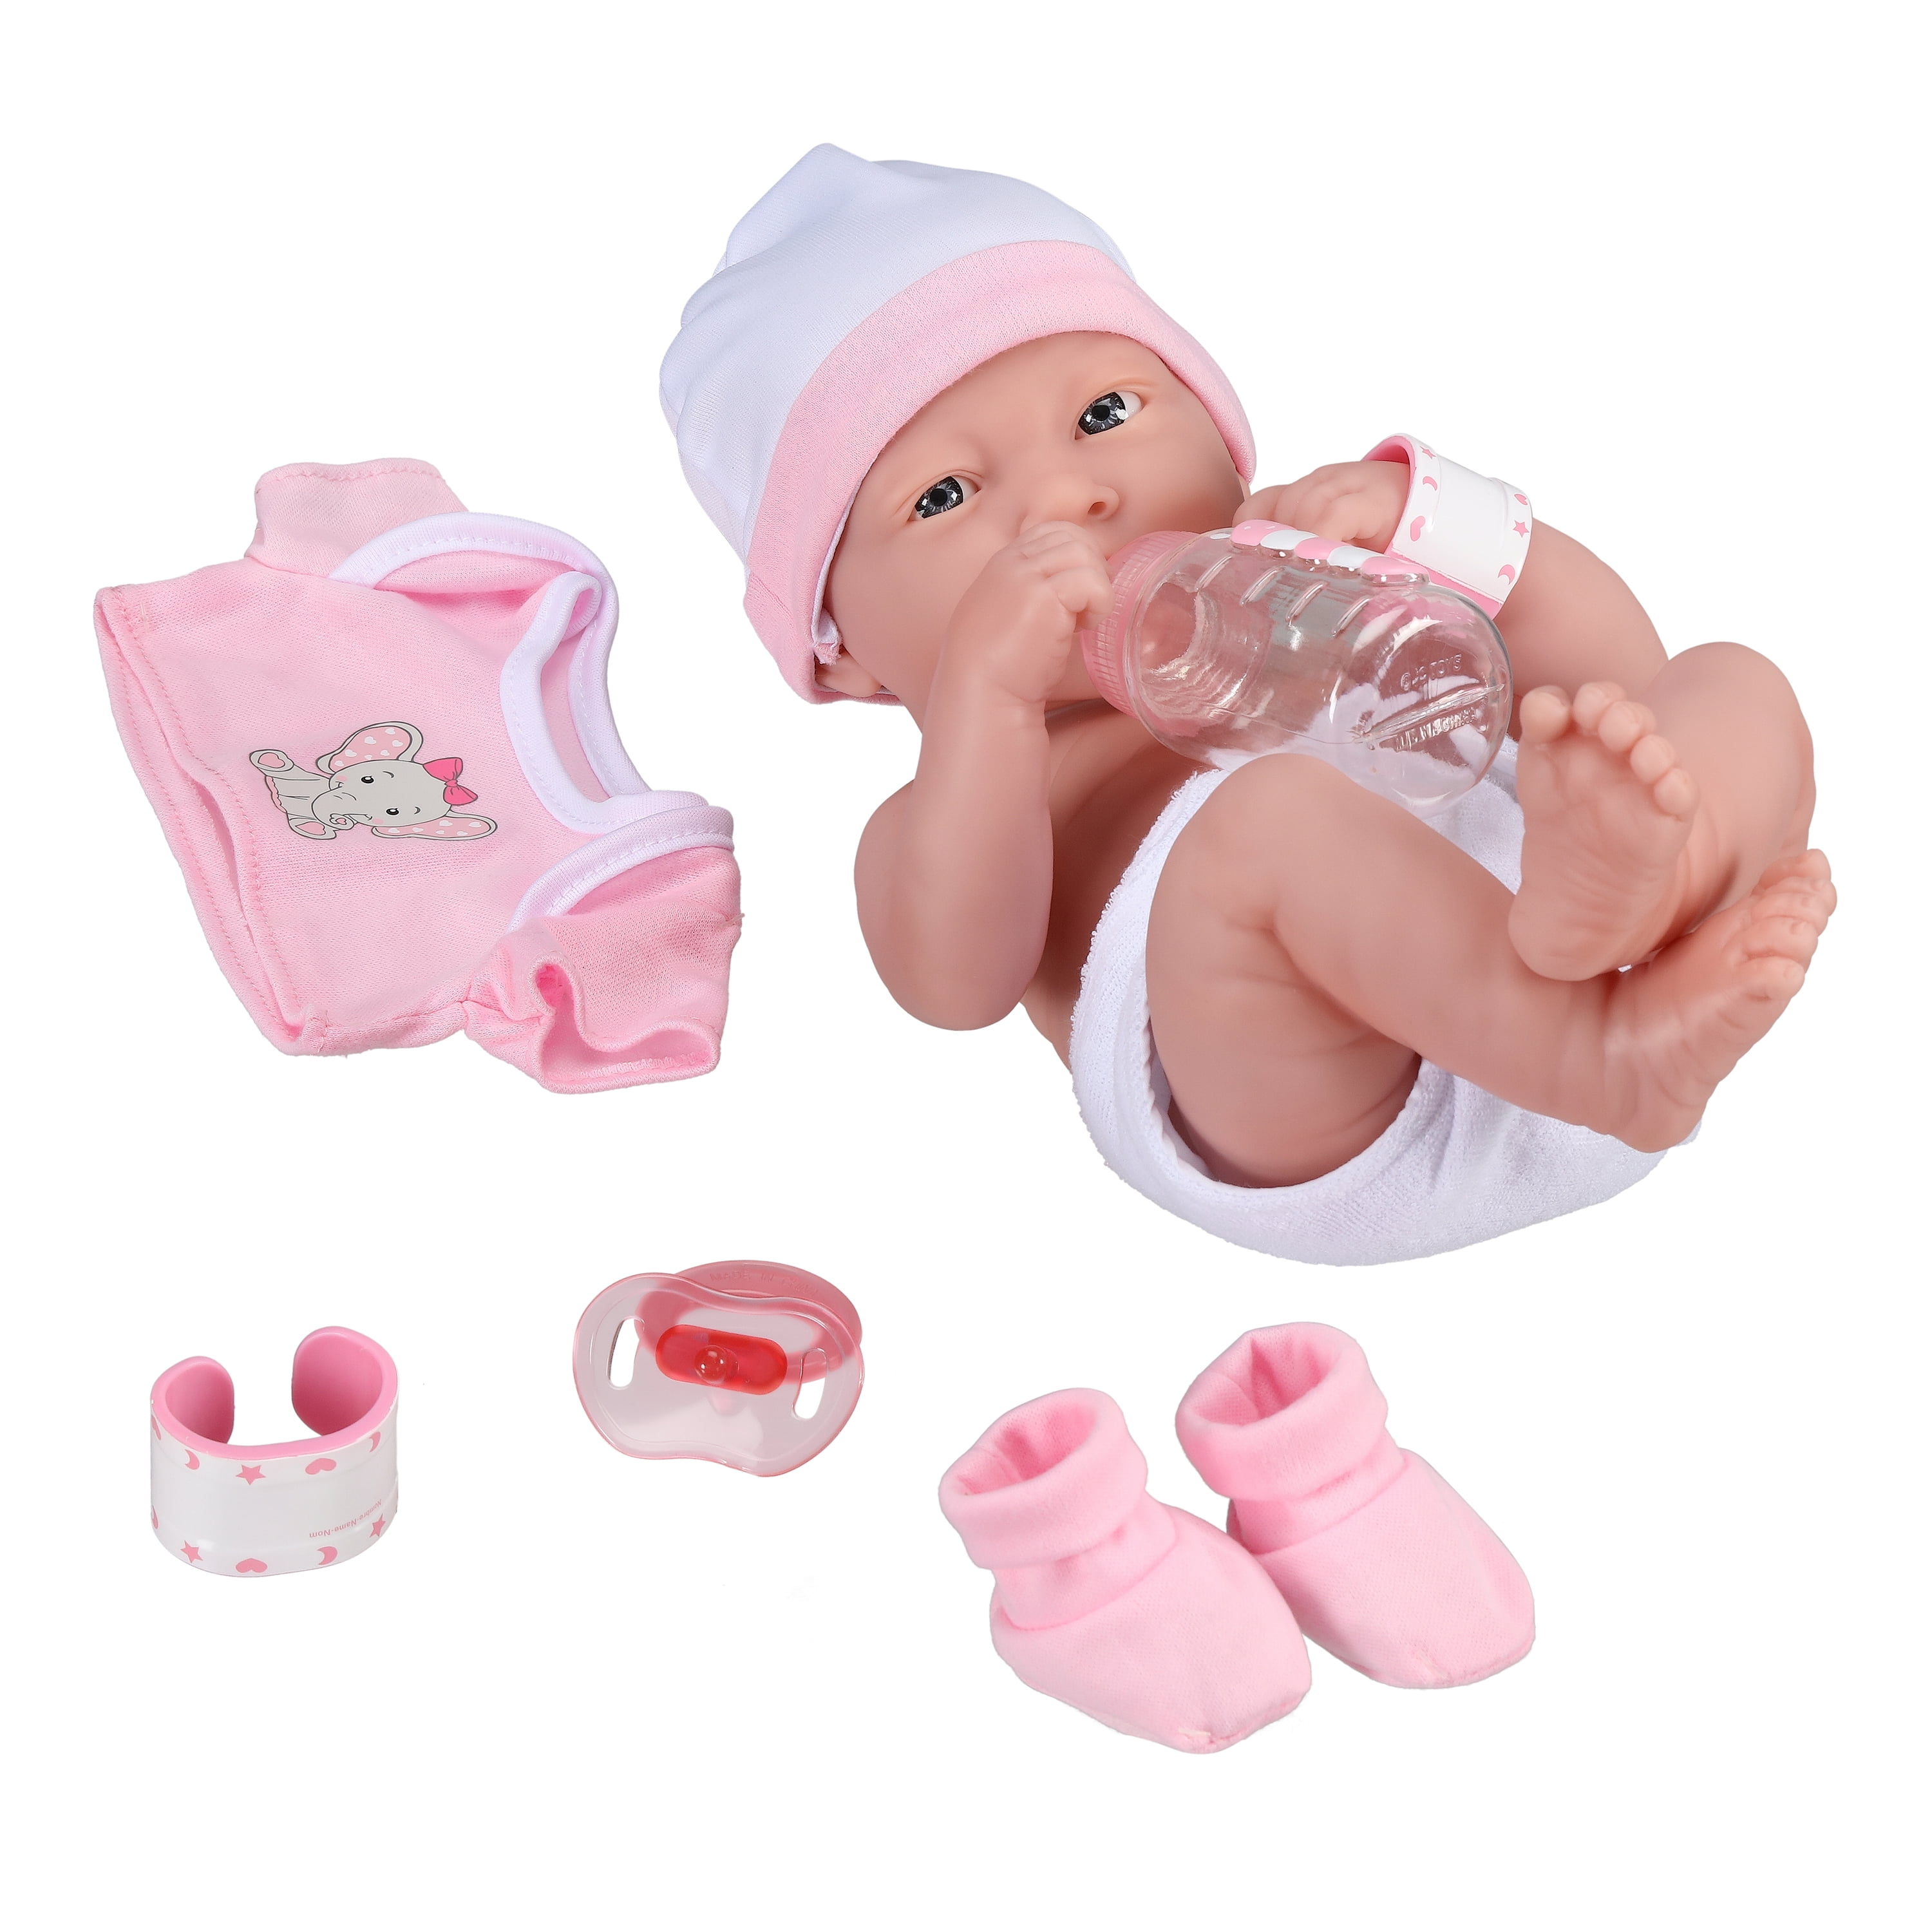 SWEET Knit Baby Doll Outfit For Reborn Infant Newborn PINK 